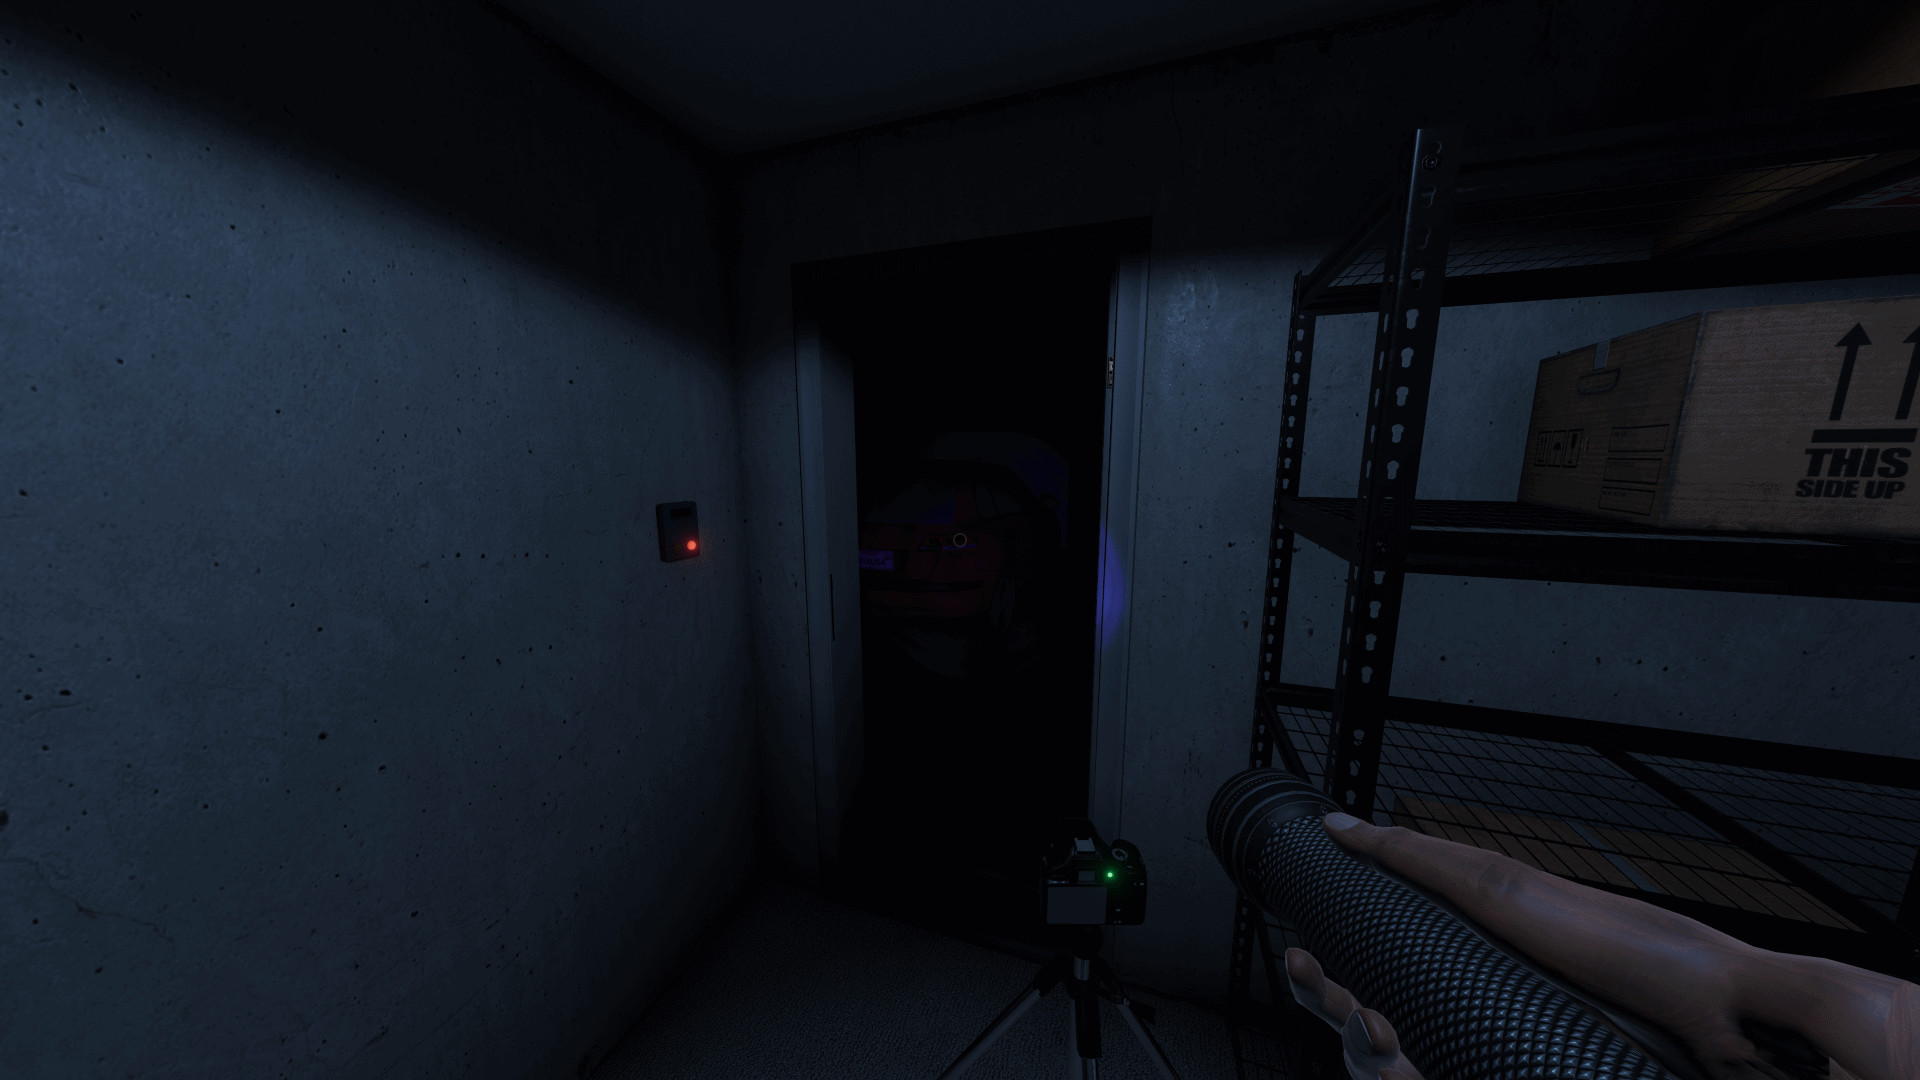 One of the aspects of Phasmophobia's gameplay is setting up rooms to capture ghost activity. 